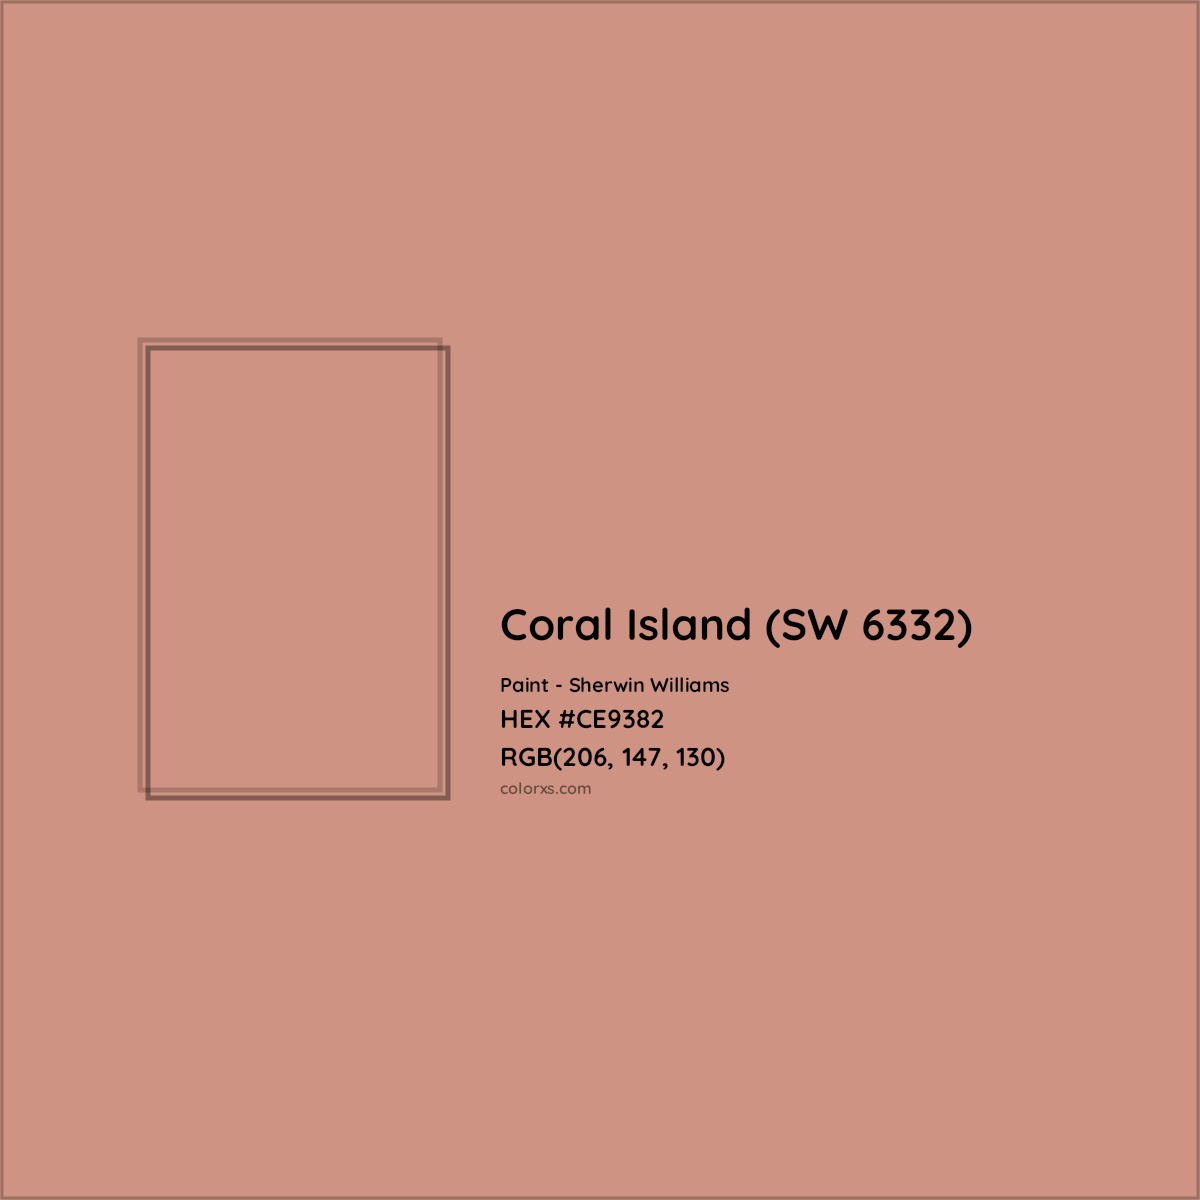 HEX #CE9382 Coral Island (SW 6332) Paint Sherwin Williams - Color Code